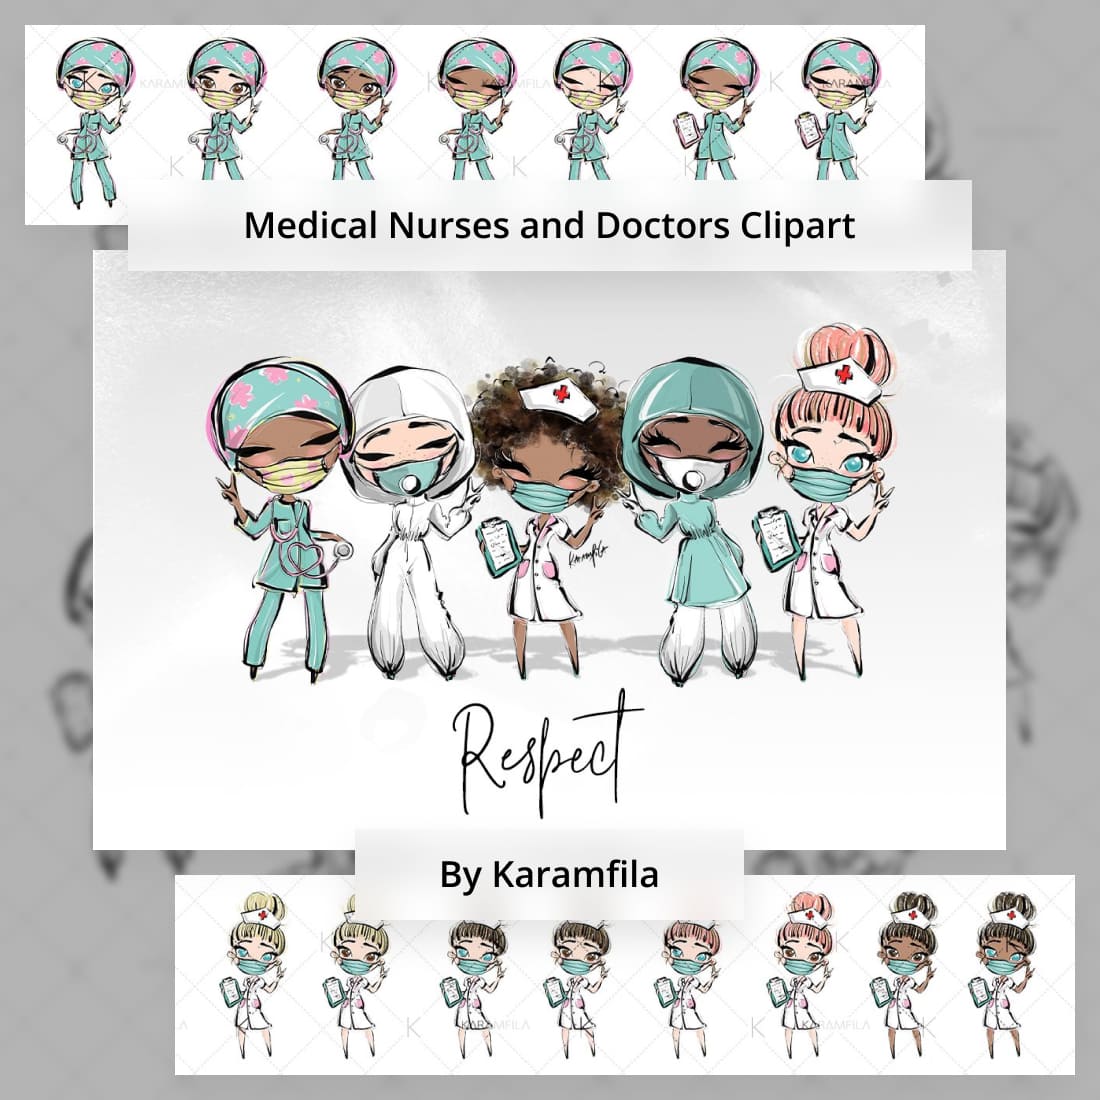 medical nurses and doctors clipart cover image.